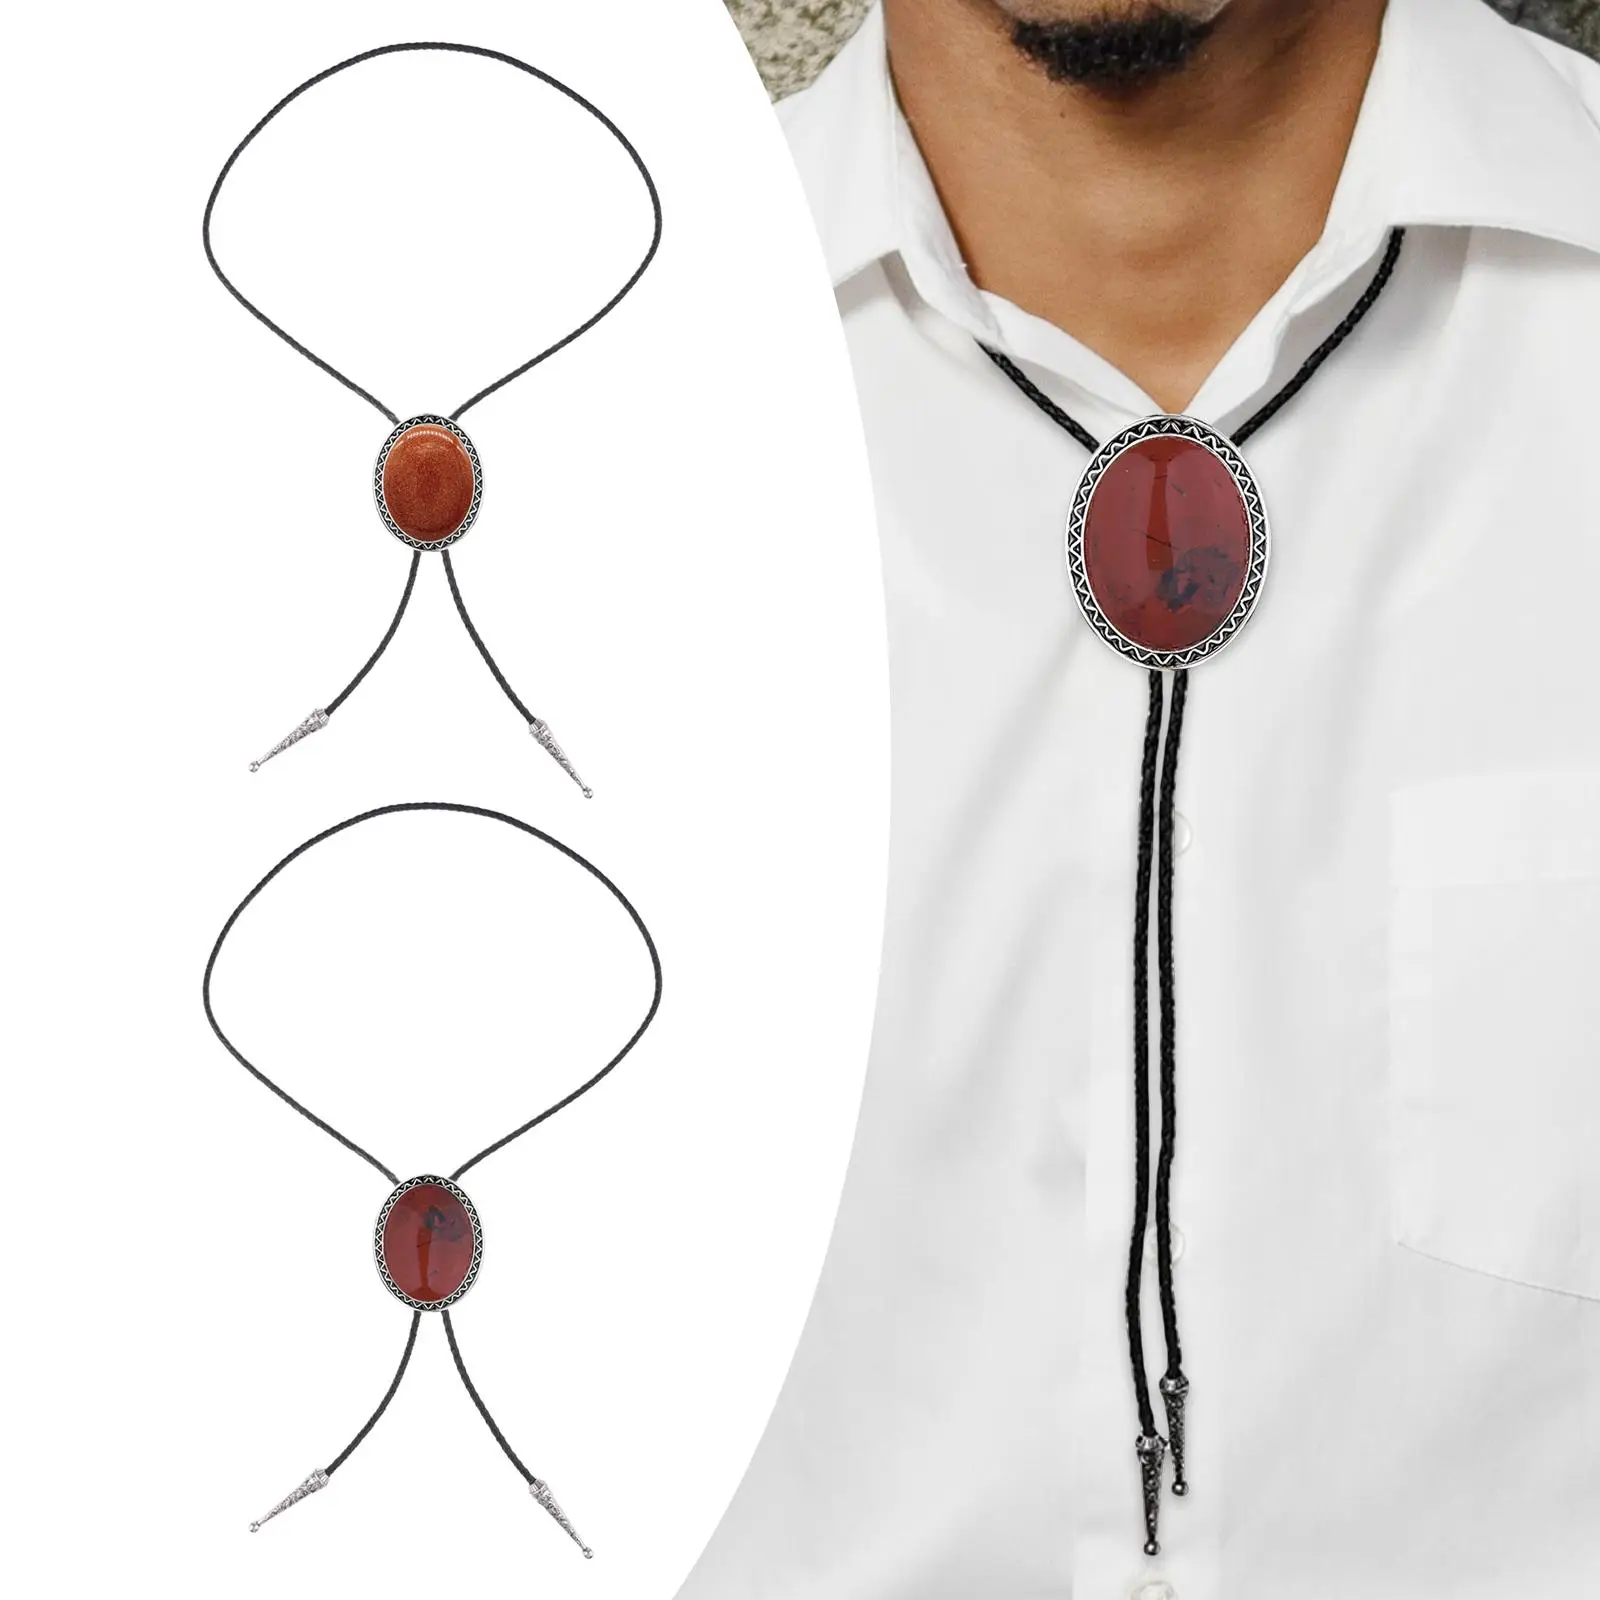 Vintage Style Necktie American Style Necklace Chain Pendant Men Women Bolo Tie for Cosplay Graduation Banquet Birthday Prom